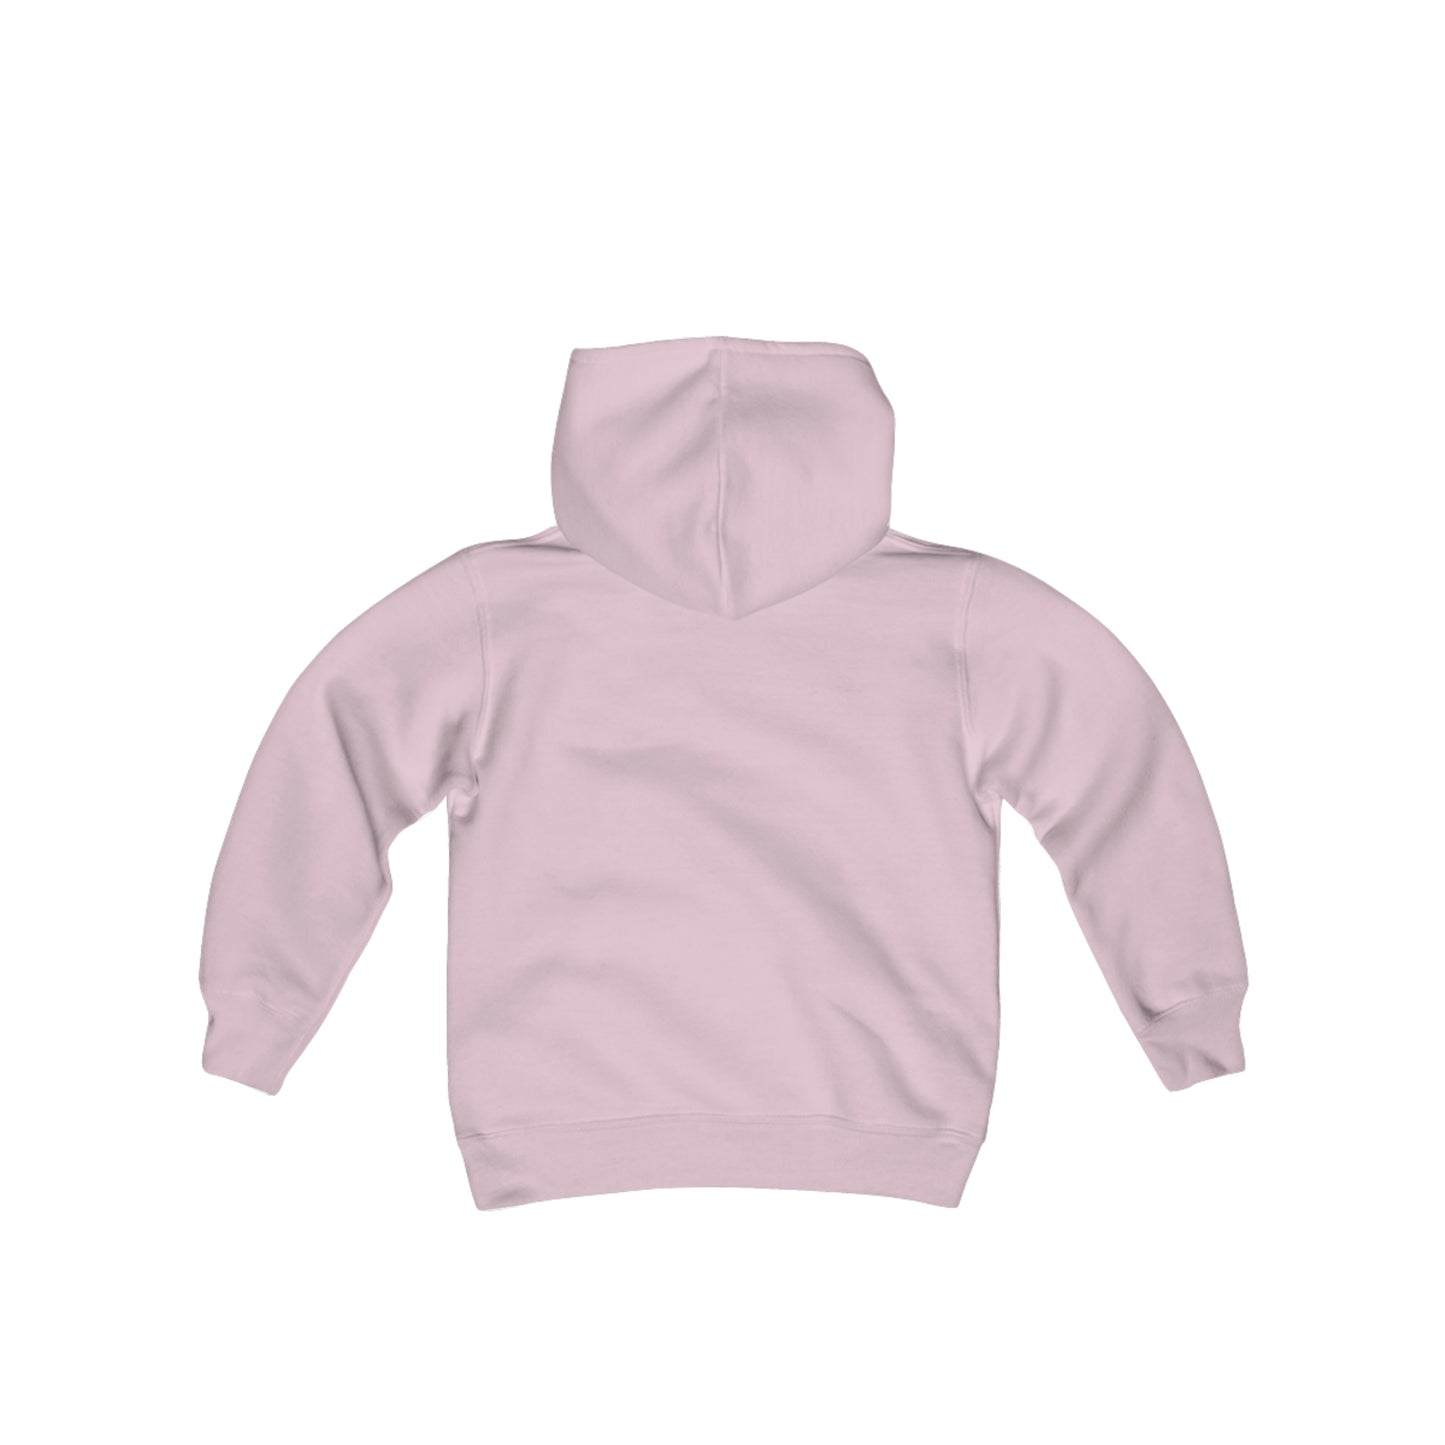 Youth Heavy Blend Hooded Sweatshirt  By Flavor's Upscale